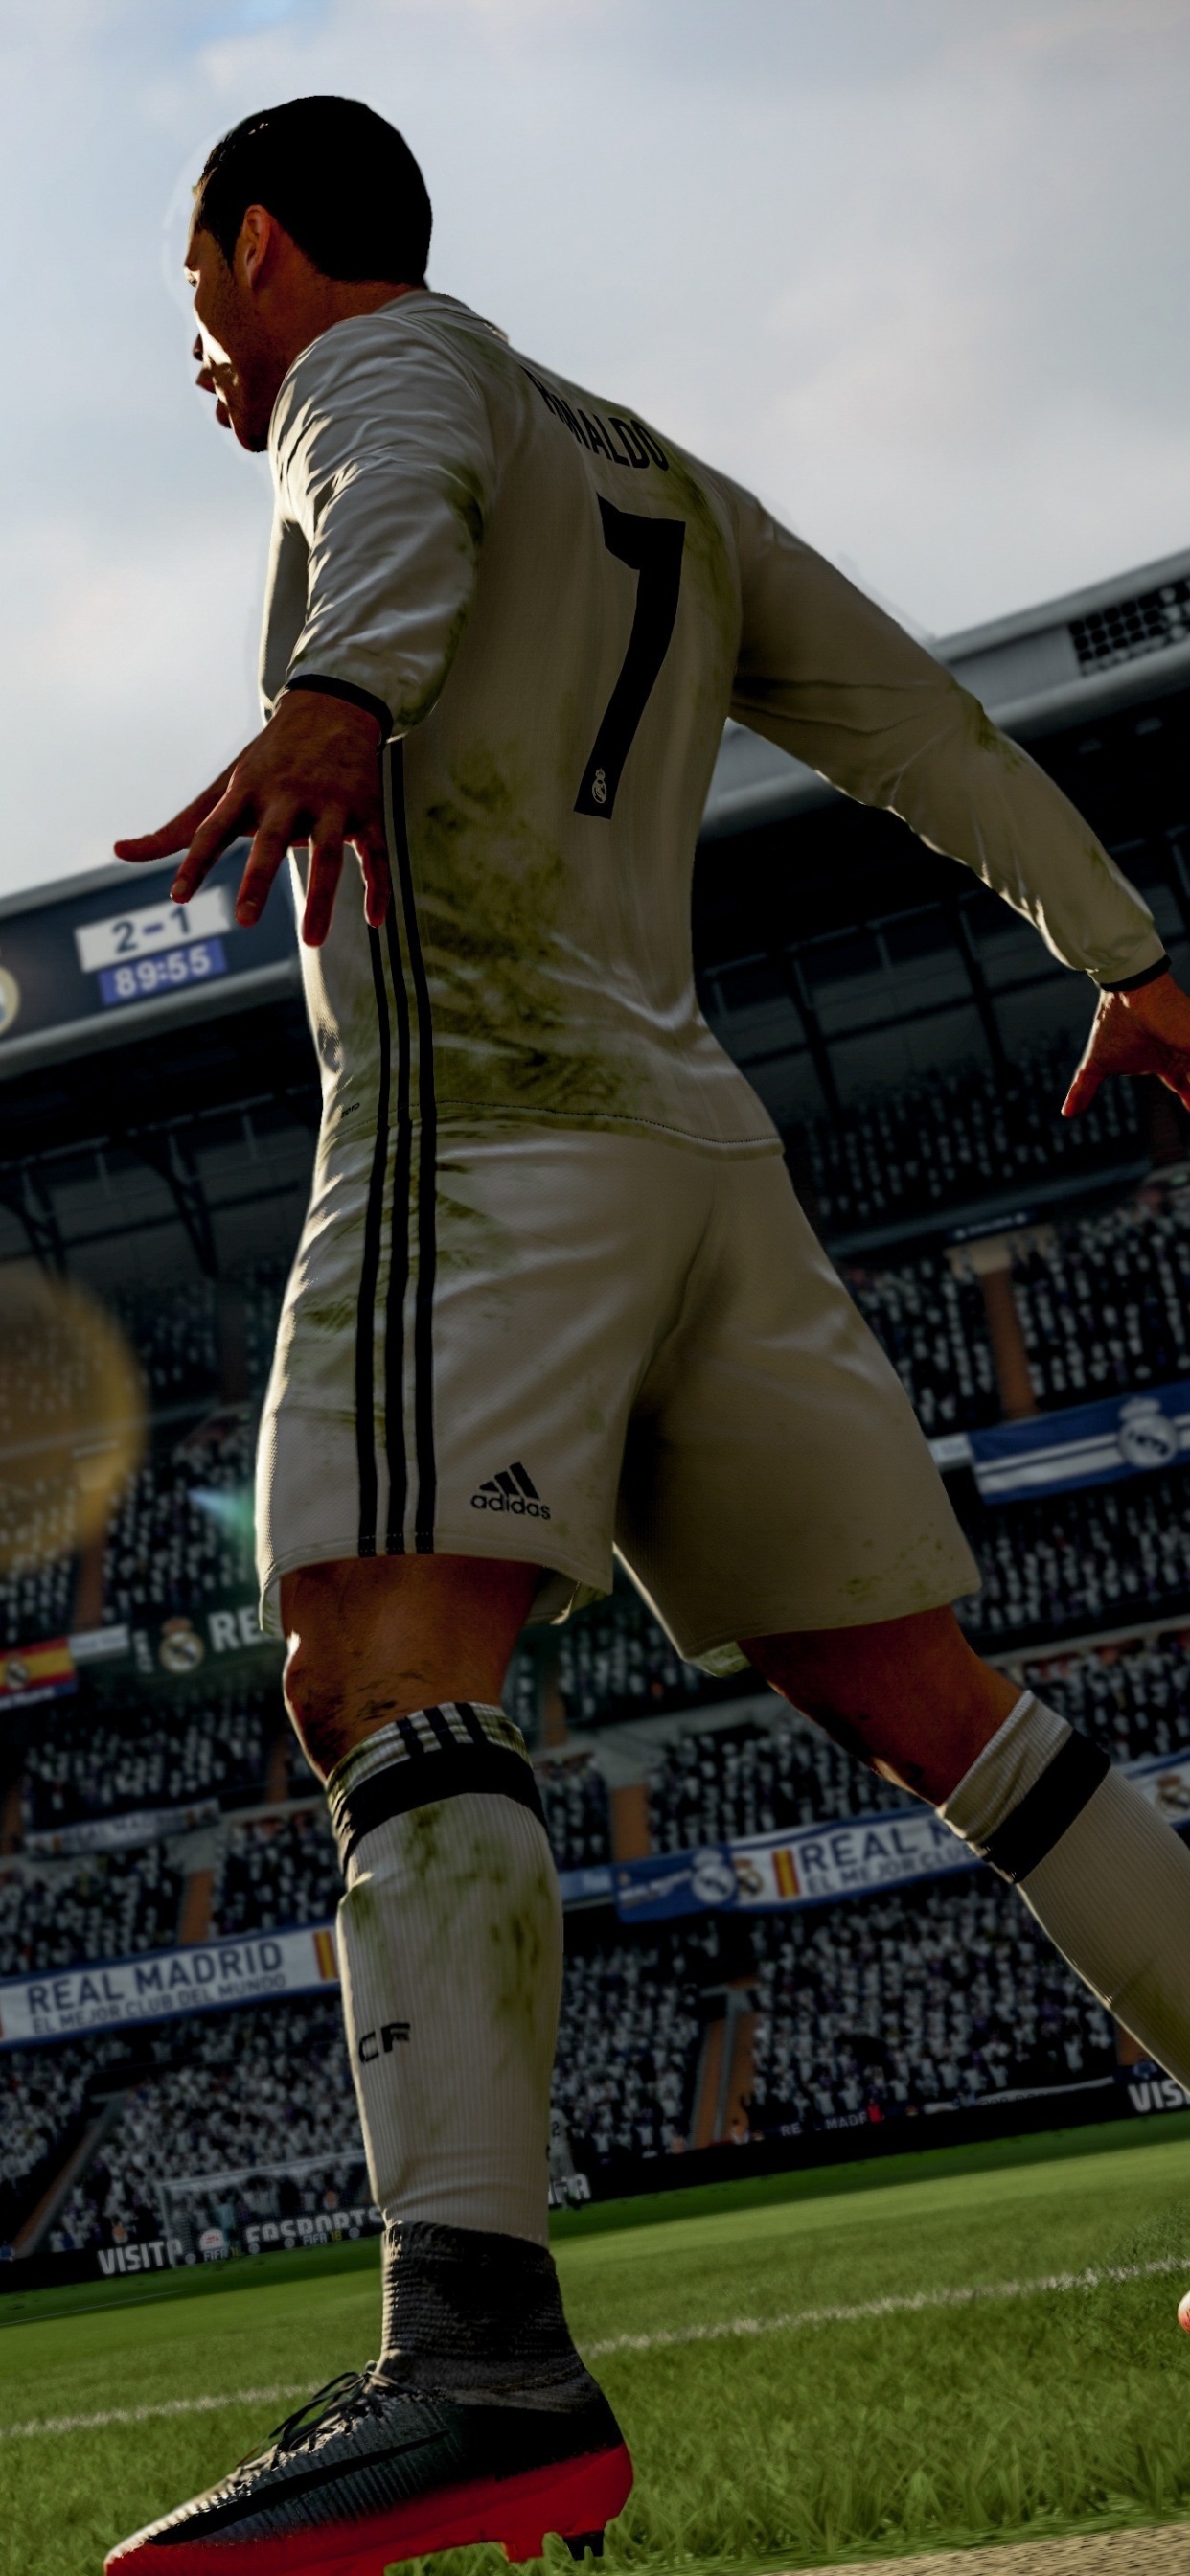 FIFA 18, ea Sports, Electronic Arts, Sports Venue, Stadion. Wallpaper in 1242x2688 Resolution